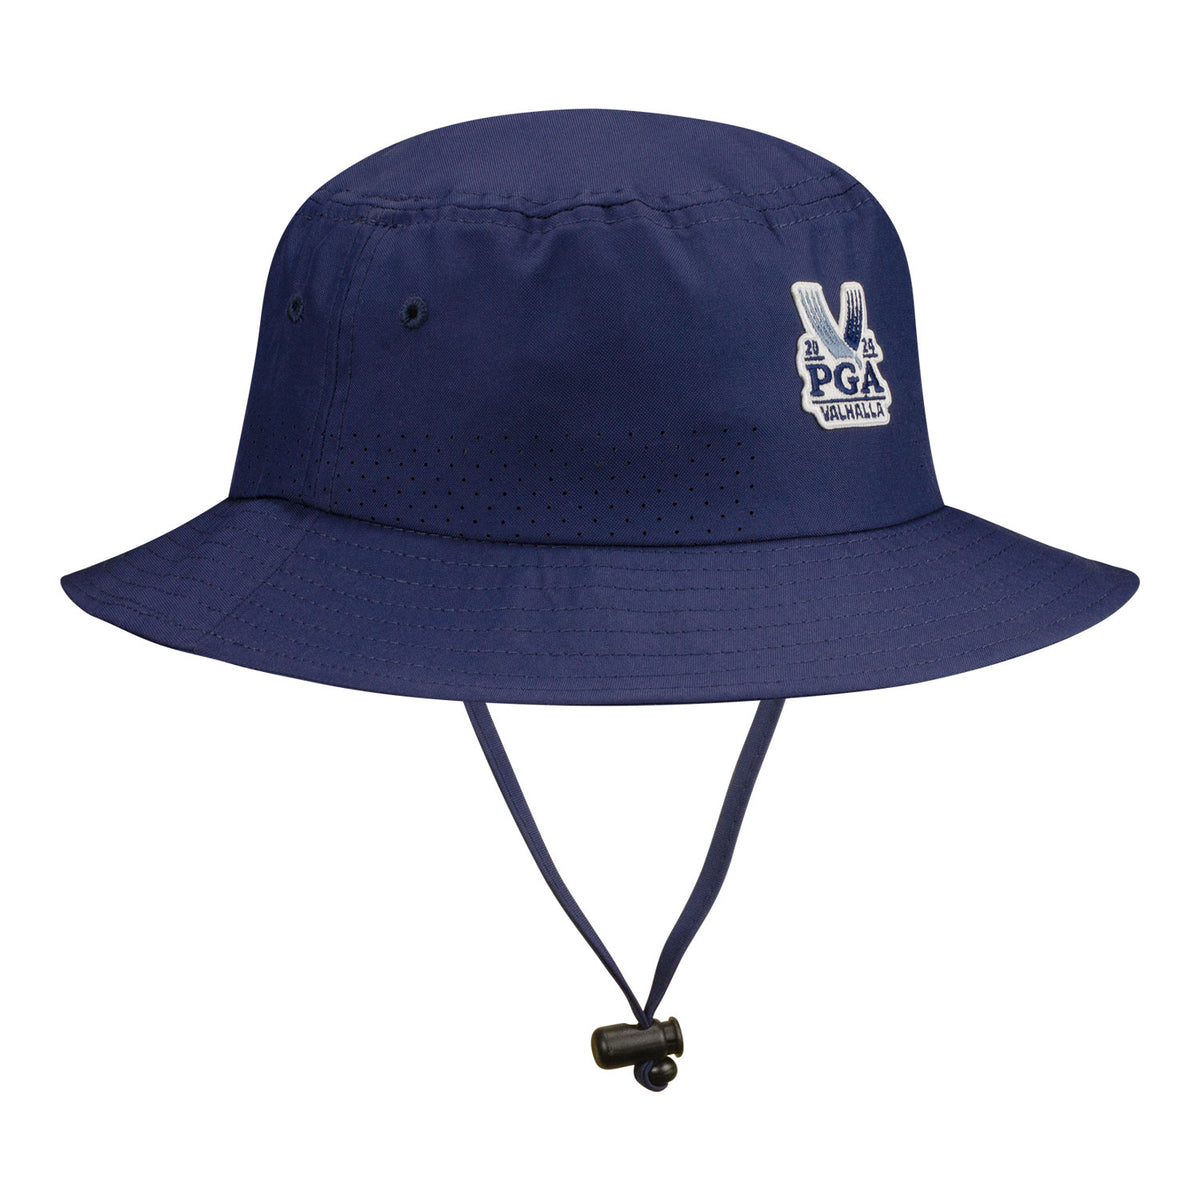 Imperial CC051 - The Geysir Cooling Sun - Protection Bucket in Navy - Front Right View